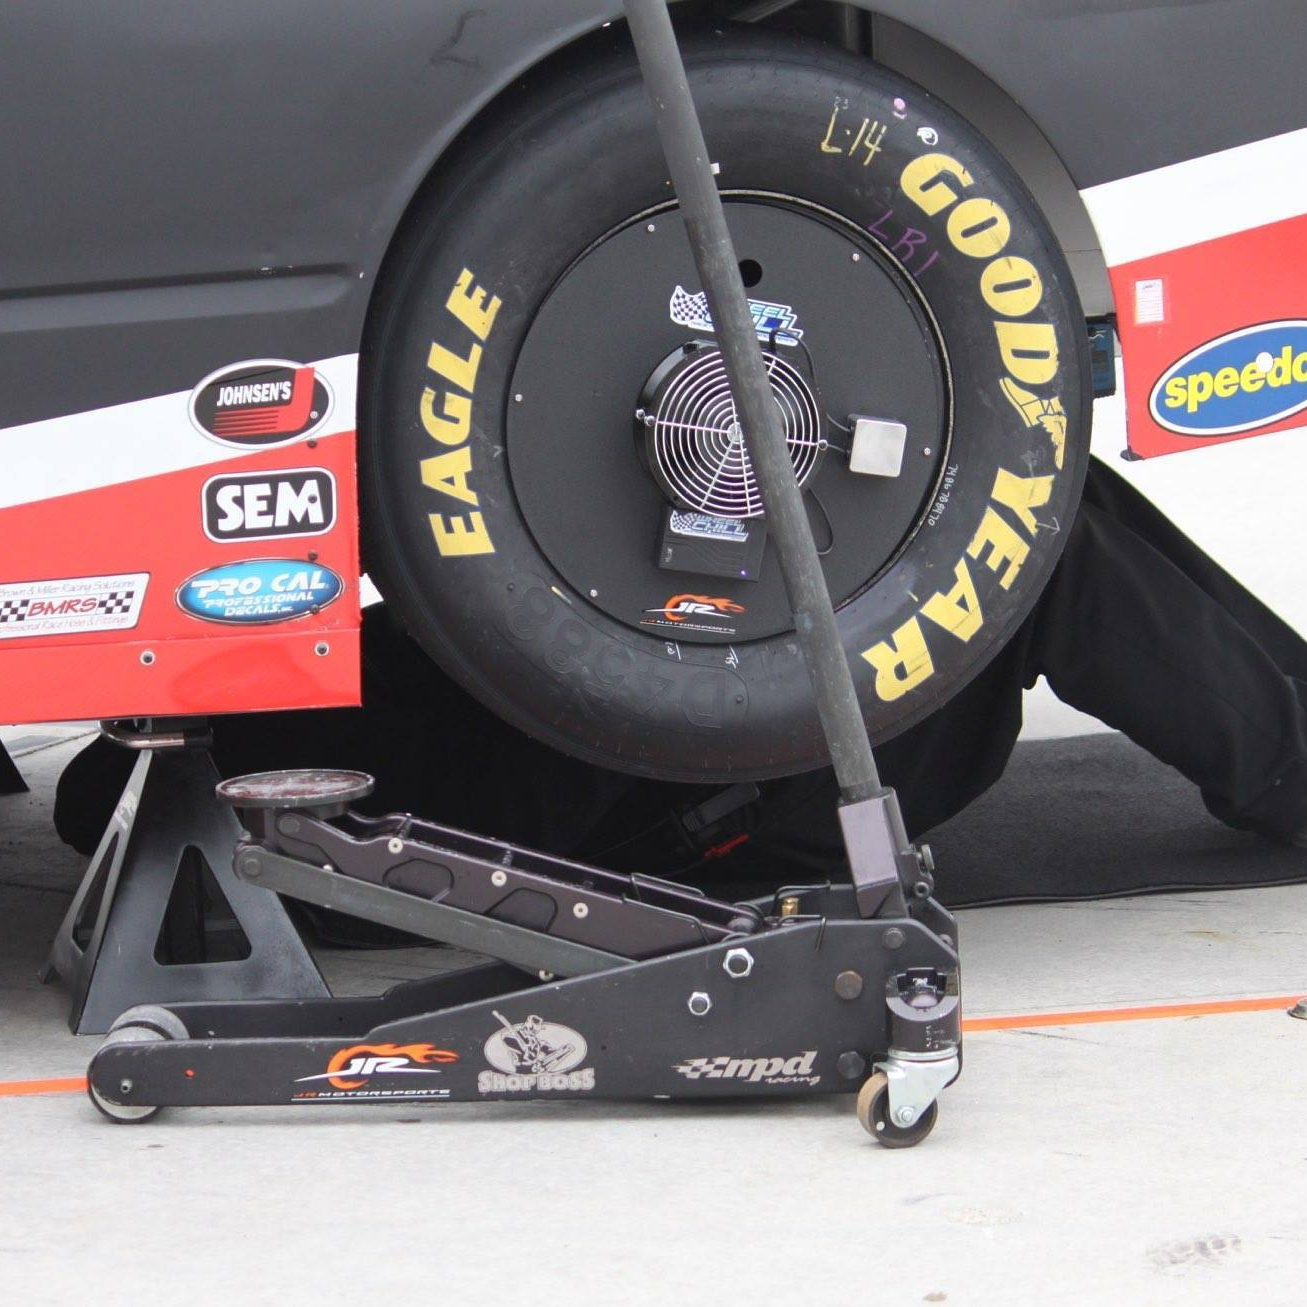 A Wireless Wheel Chill in use on a racecar that is being worked on